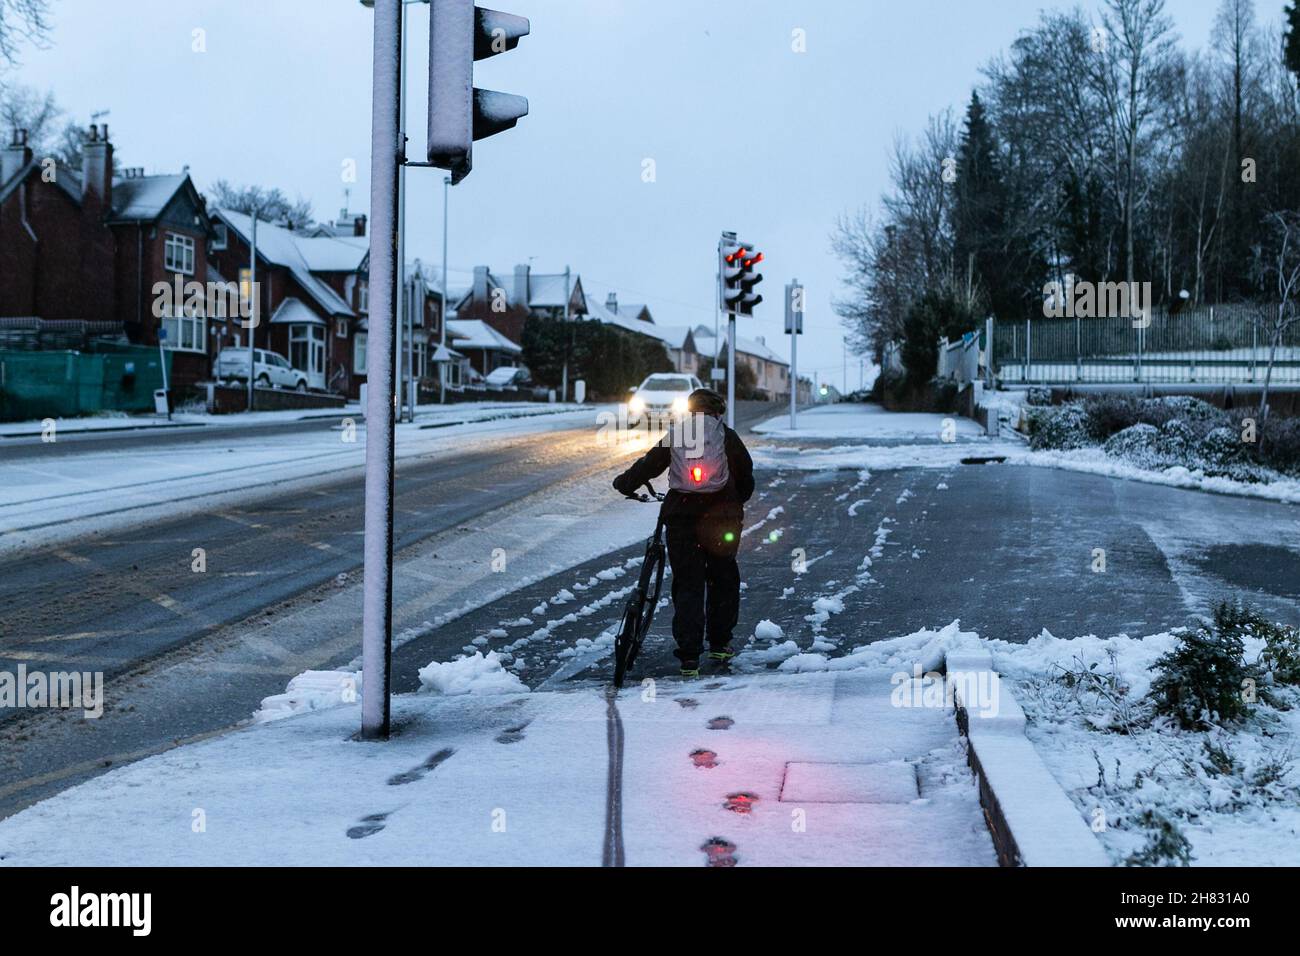 Cradley Heath, West Midlands, UK. 27th Nov, 2021. A lone cyclist decides to walk up the hill as a blanket of snow hits the the roads in Cradley Heath, West Midlands, as Saturday morning traffic is thanksfully light. Road conditions are dangerous. Credit: Peter Lopeman/Alamy Live News Stock Photo